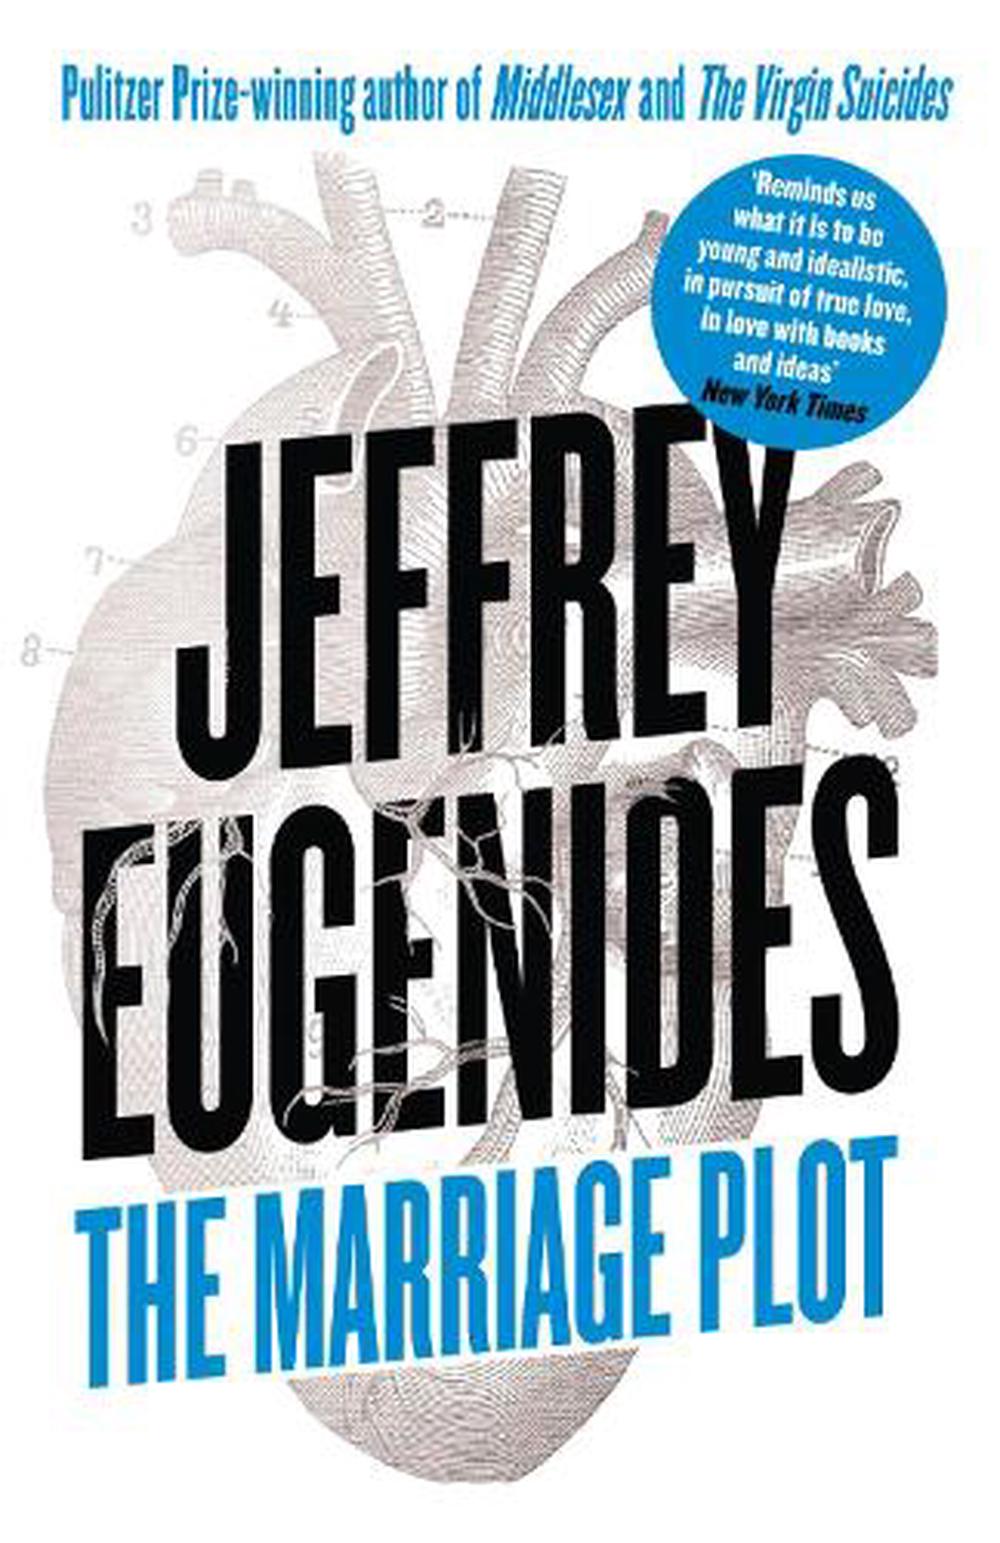 the marriage plot book